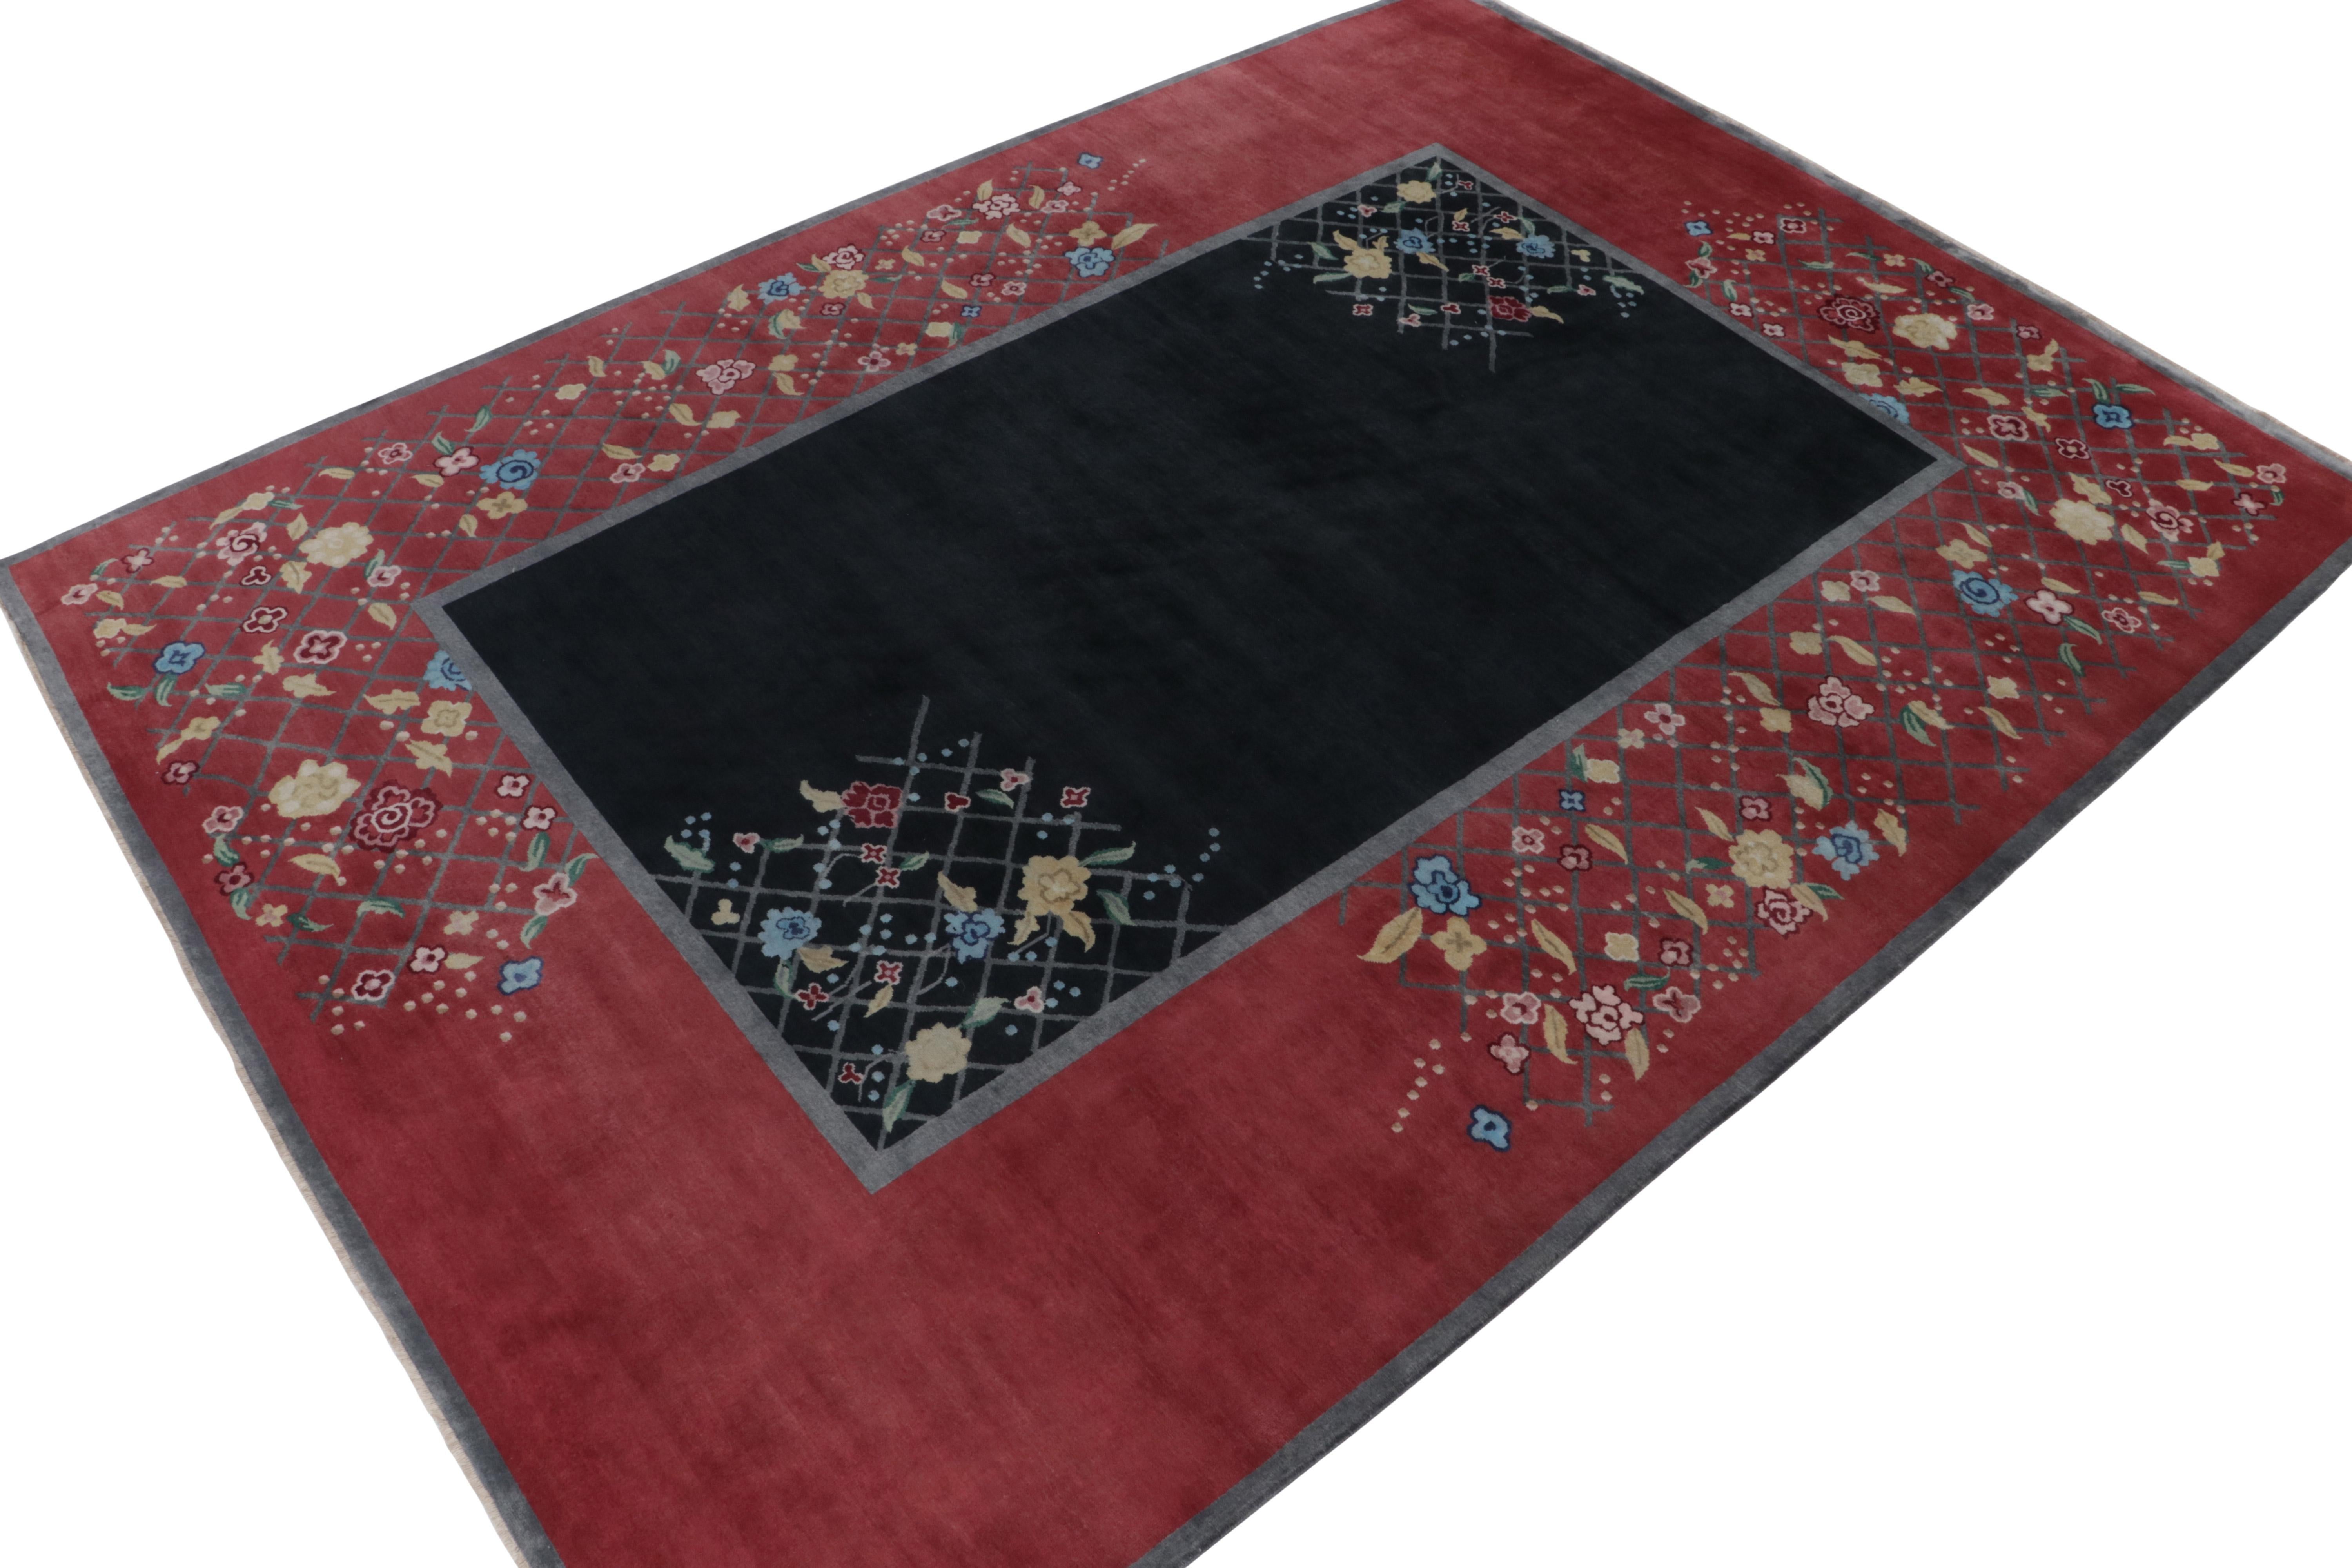 Hand-knotted in luscious wool, a 10x14 Art Deco rug, inspired by Chinese sensibilities of the 1920s. From Rug & Kilim’s inspired new Deco Collection, recapturing both the most iconic and unsung styles in history.   

On the Design: A deep red border